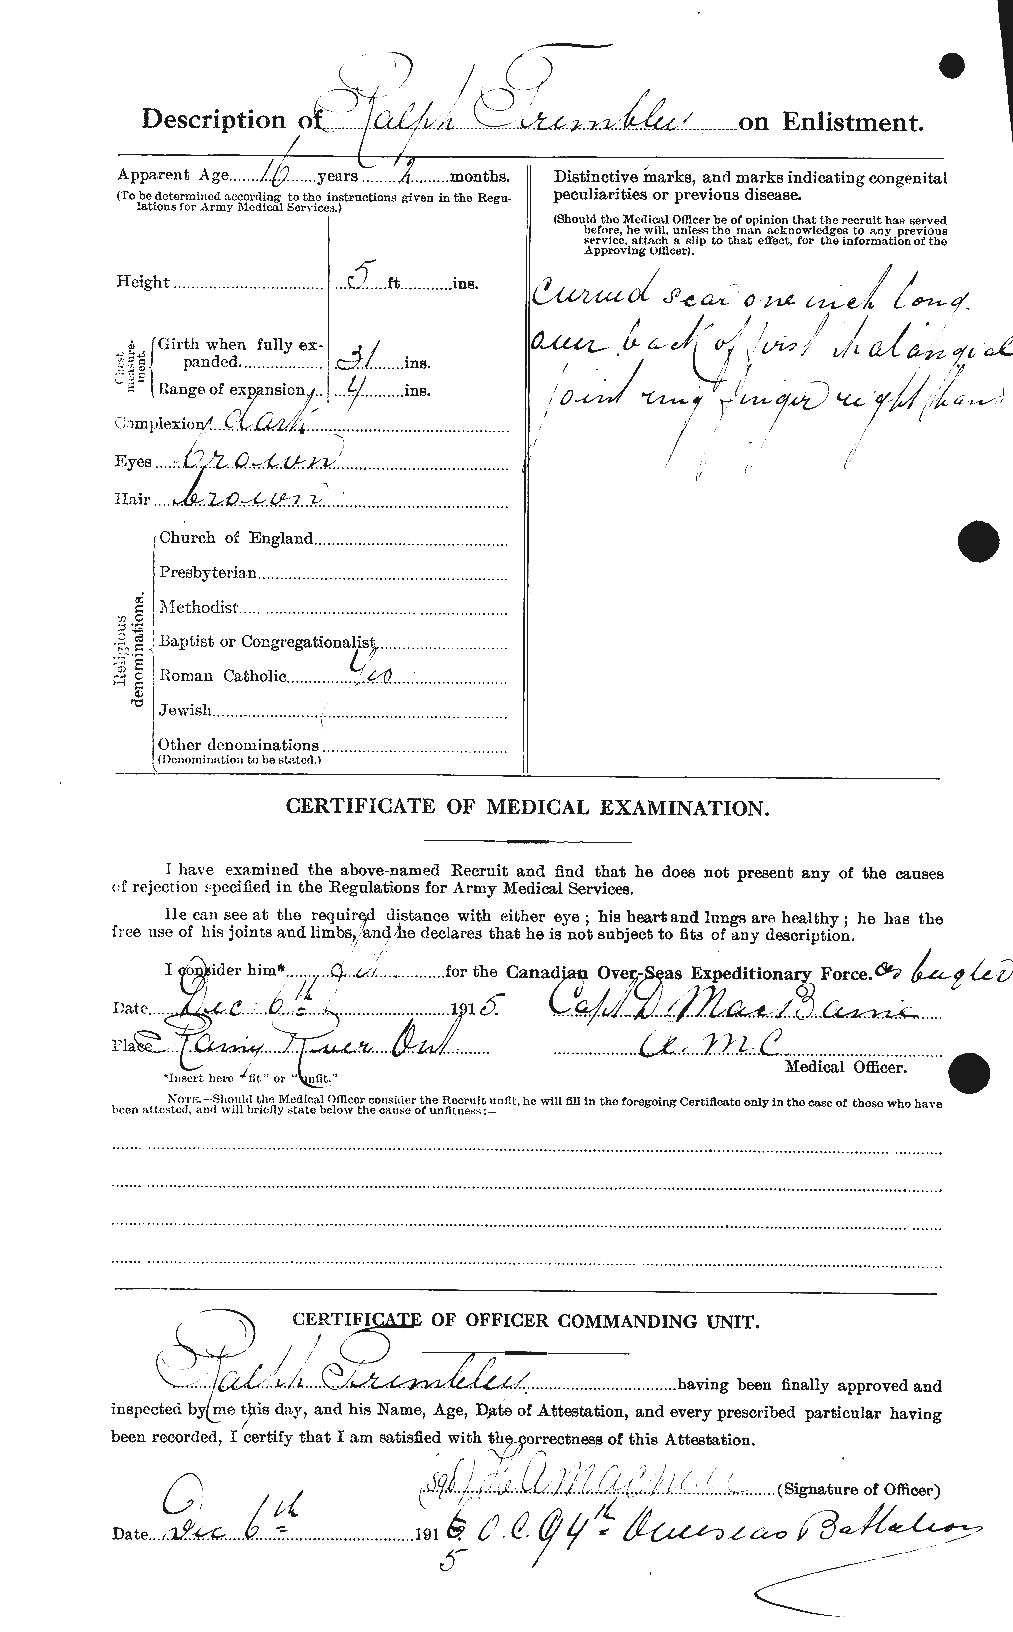 Personnel Records of the First World War - CEF 639246b